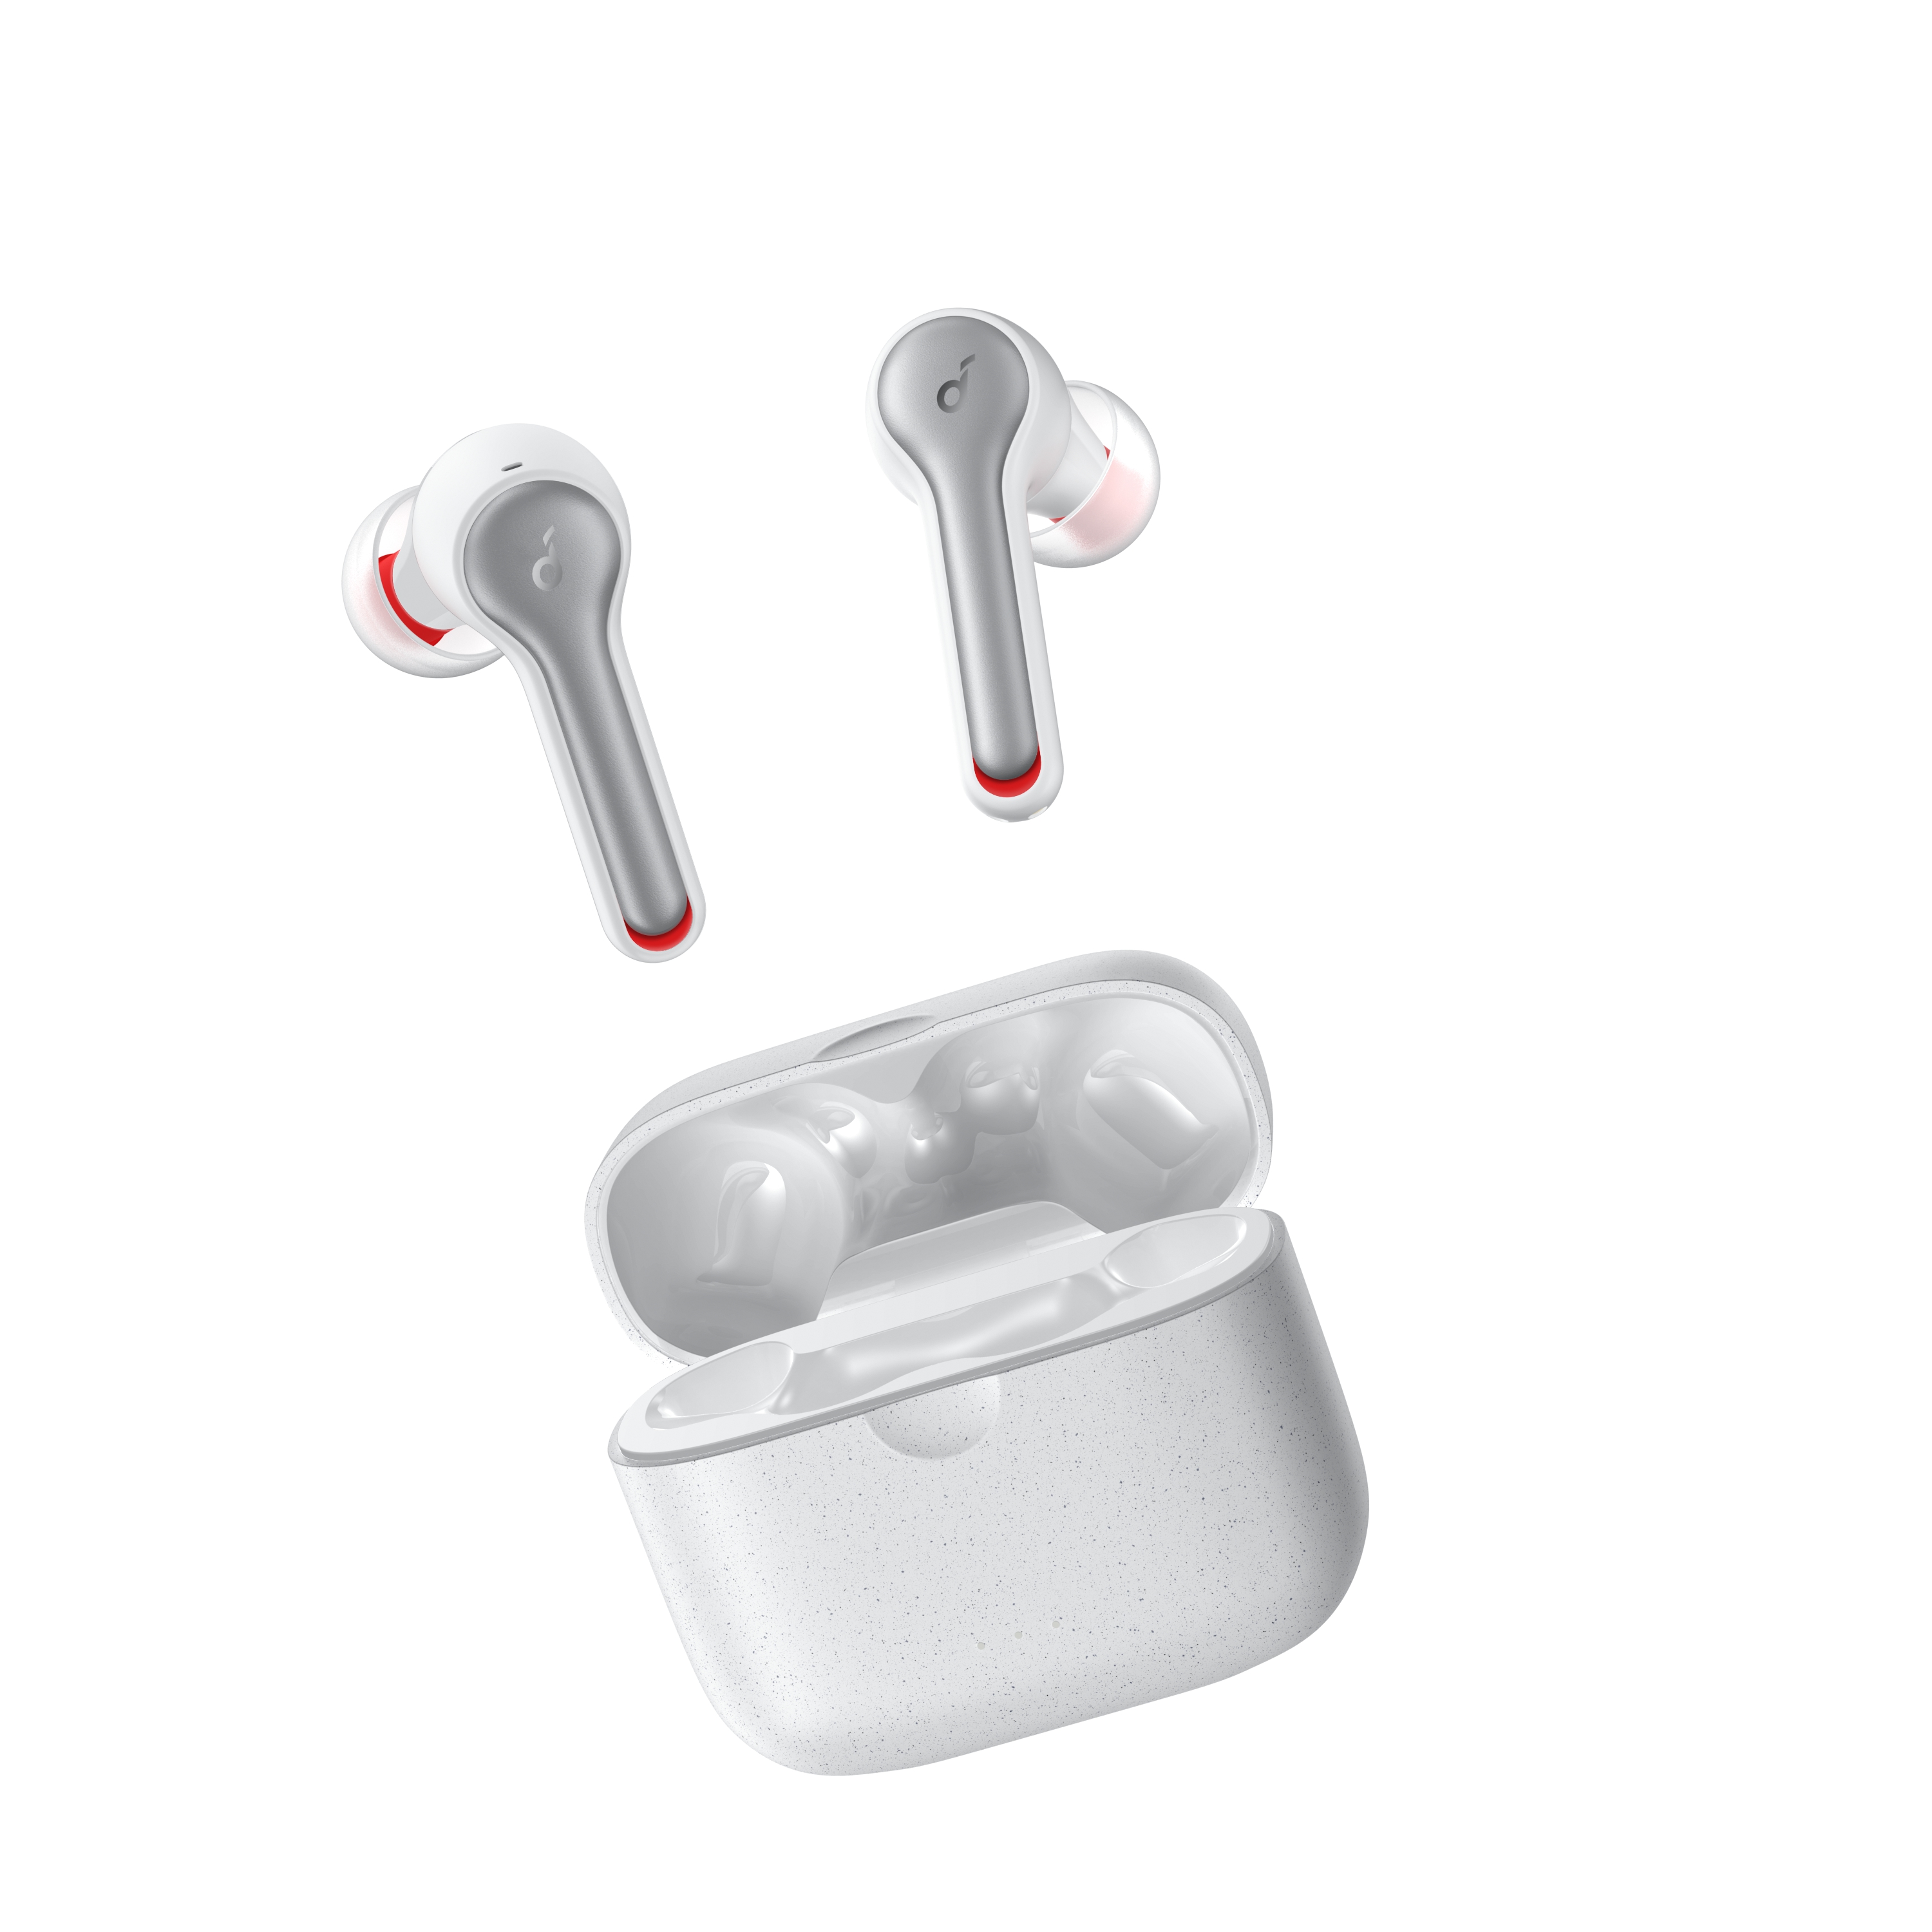 Anker SoundCore Liberty Air 2 TWS In-Ear Headphones, White - image 1 of 5